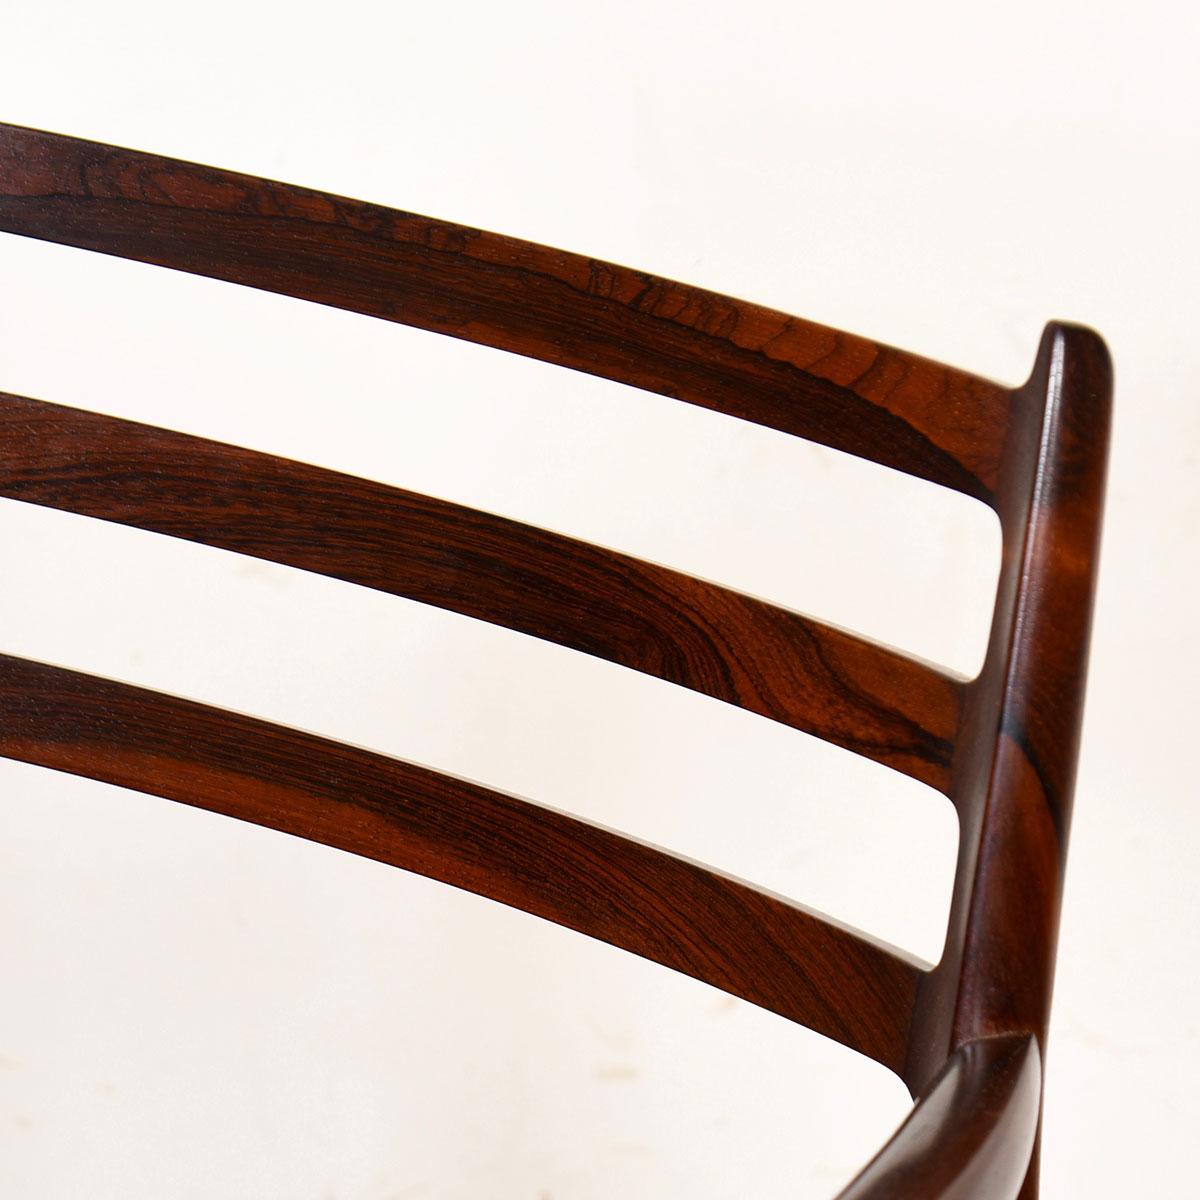 Pair of Moller Danish Horn Arm-Chairs #62 in Brazilian Rosewood For Sale 1